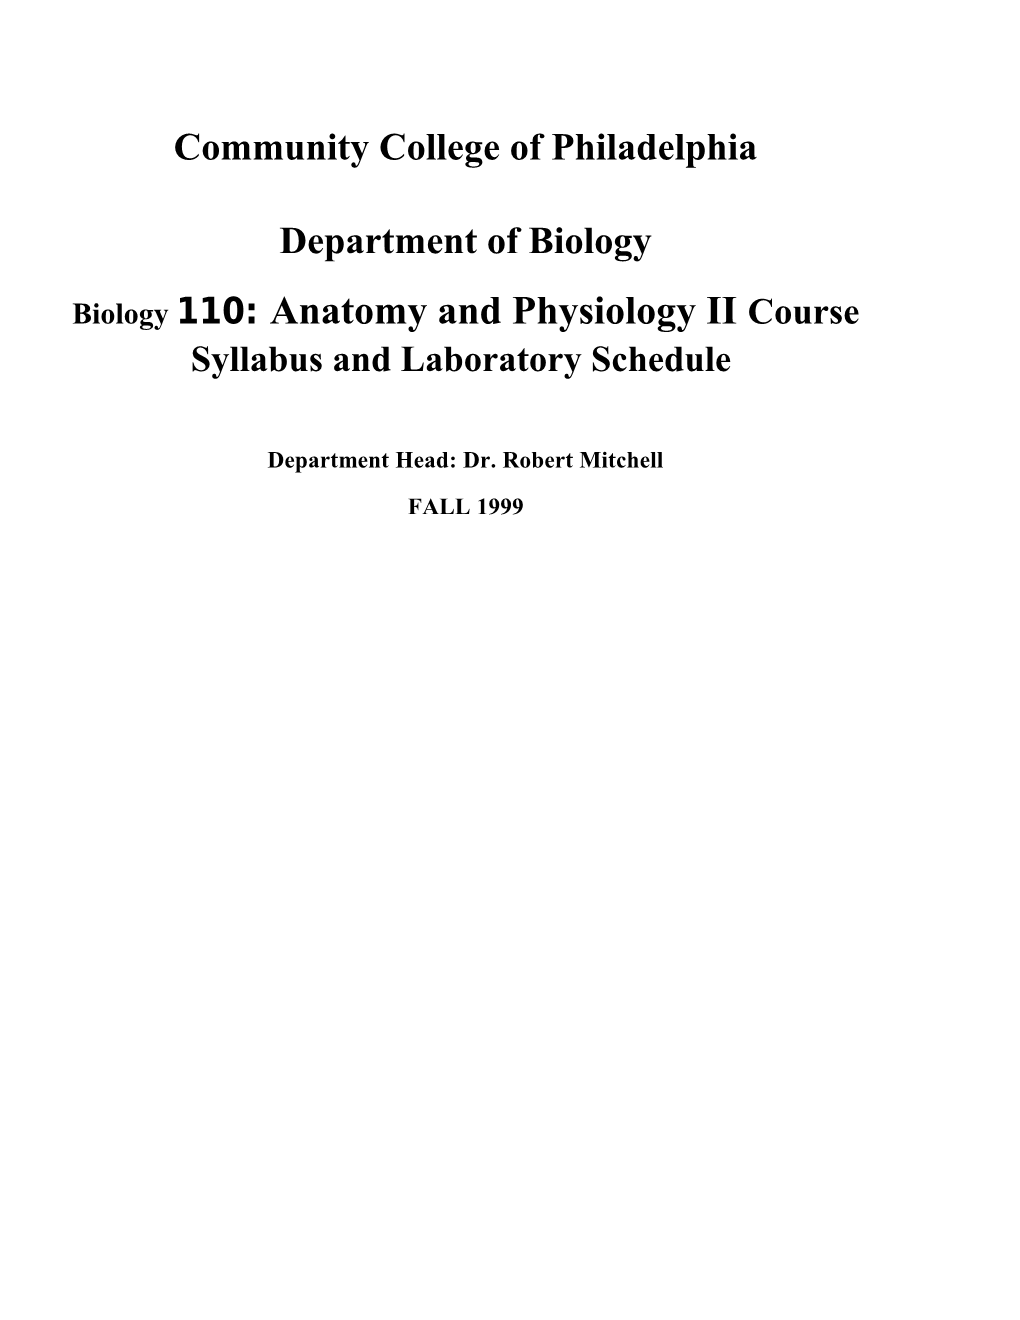 Biology 110: Anatomy and Physiology II Course Syllabus and Laboratory Schedule